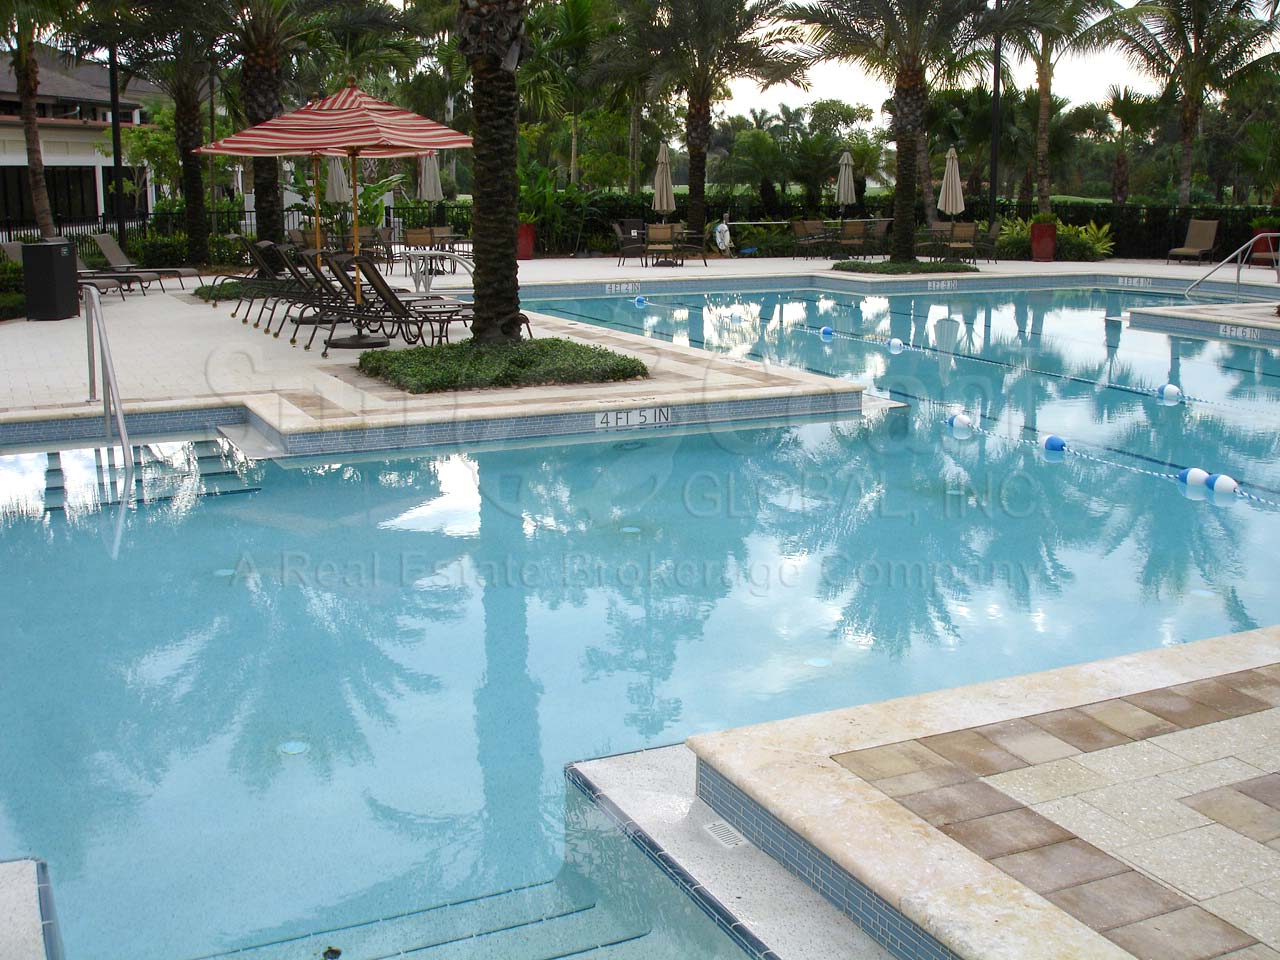 WYNDEMERE Golf and Country Club pool area